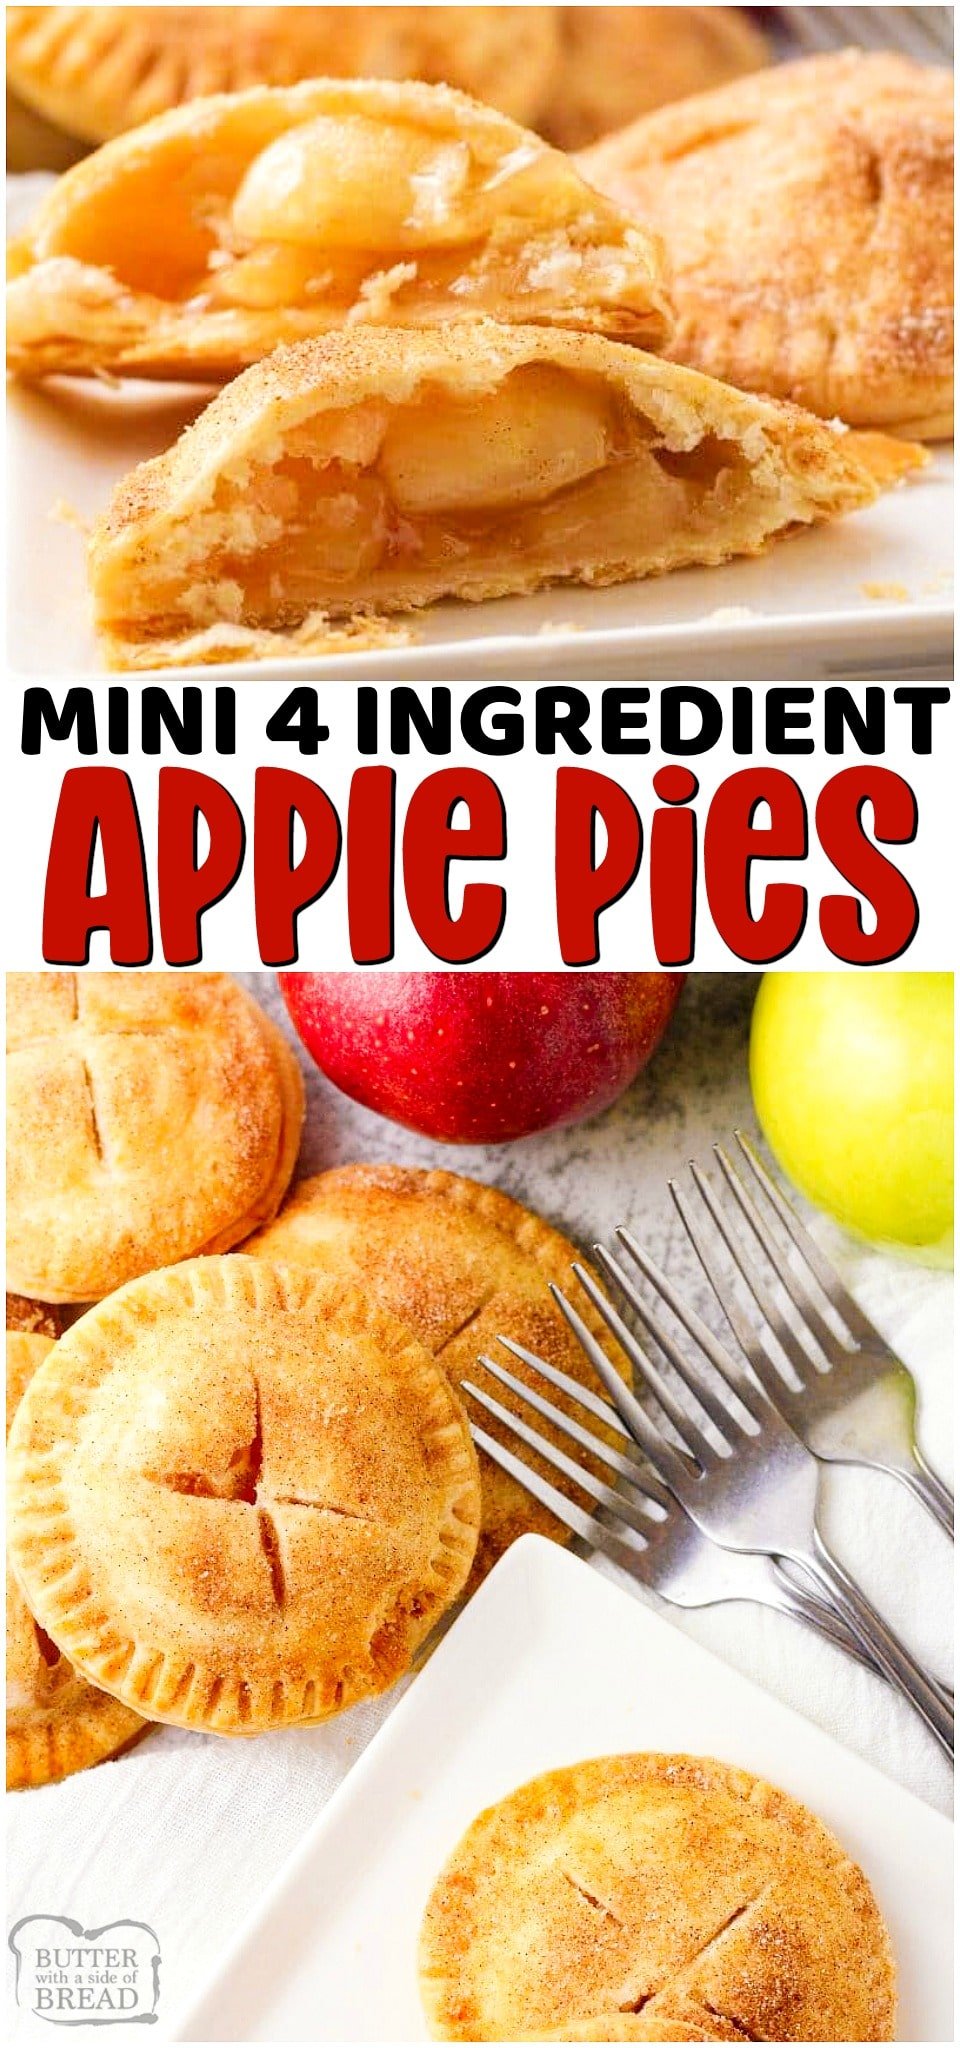 Mini Apple Pies are a simple 4 ingredient dessert made with flaky pie crust & apple pie filling. Lovely tastes of apple pie only so much easier to make! #apples #pie #applepie #easypie #minipie #pierecipe #dessert #baking from BUTTER WITH A SIDE OF BREAD